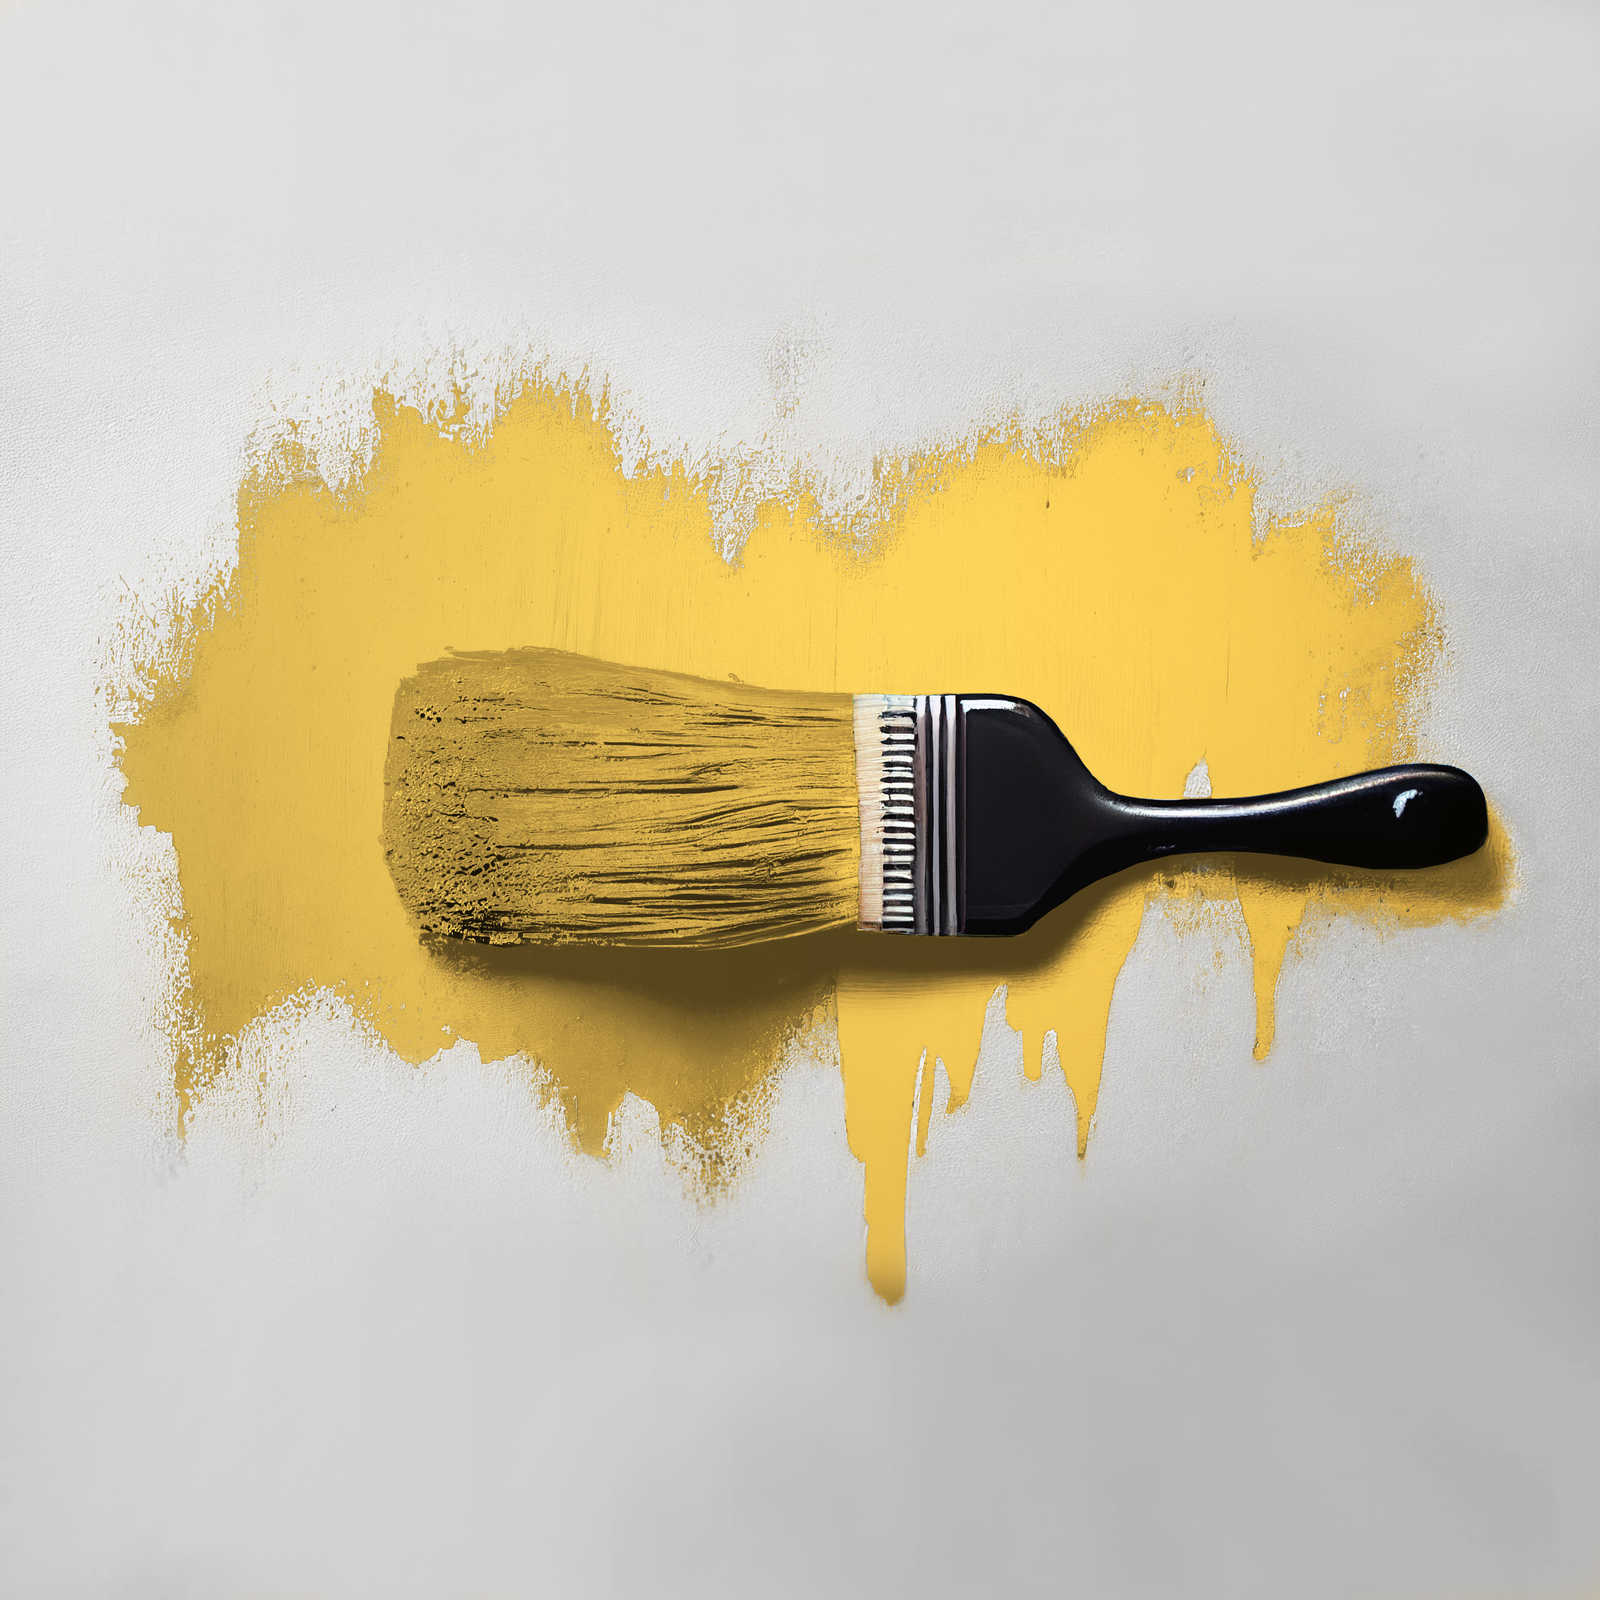             Wall Paint TCK5003 »Mighty Mango« in bright yellow – 2.5 litre
        